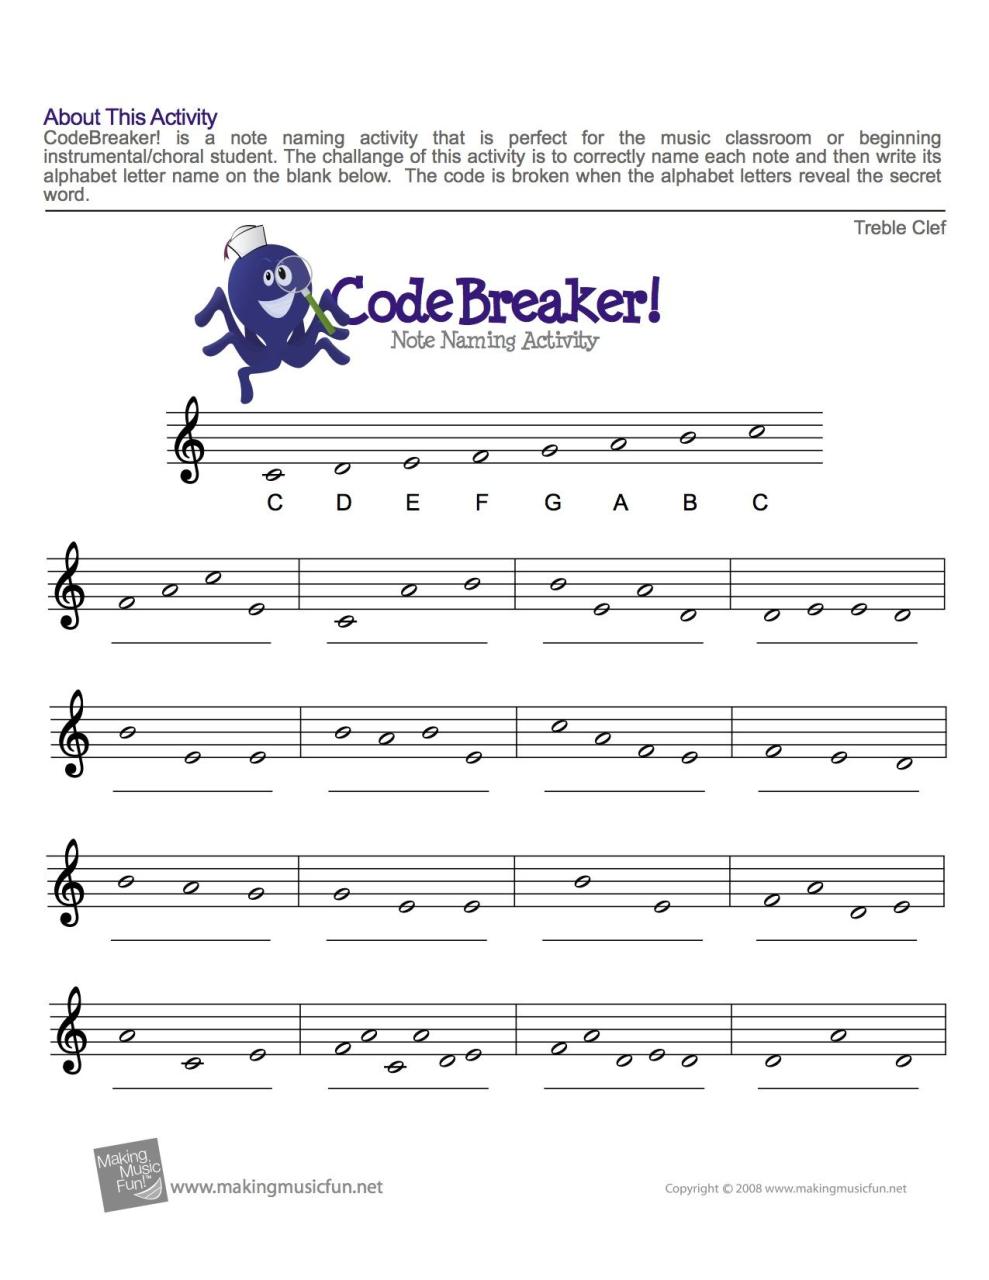 Treble Clef fun note reading Music theory worksheets, Music theory